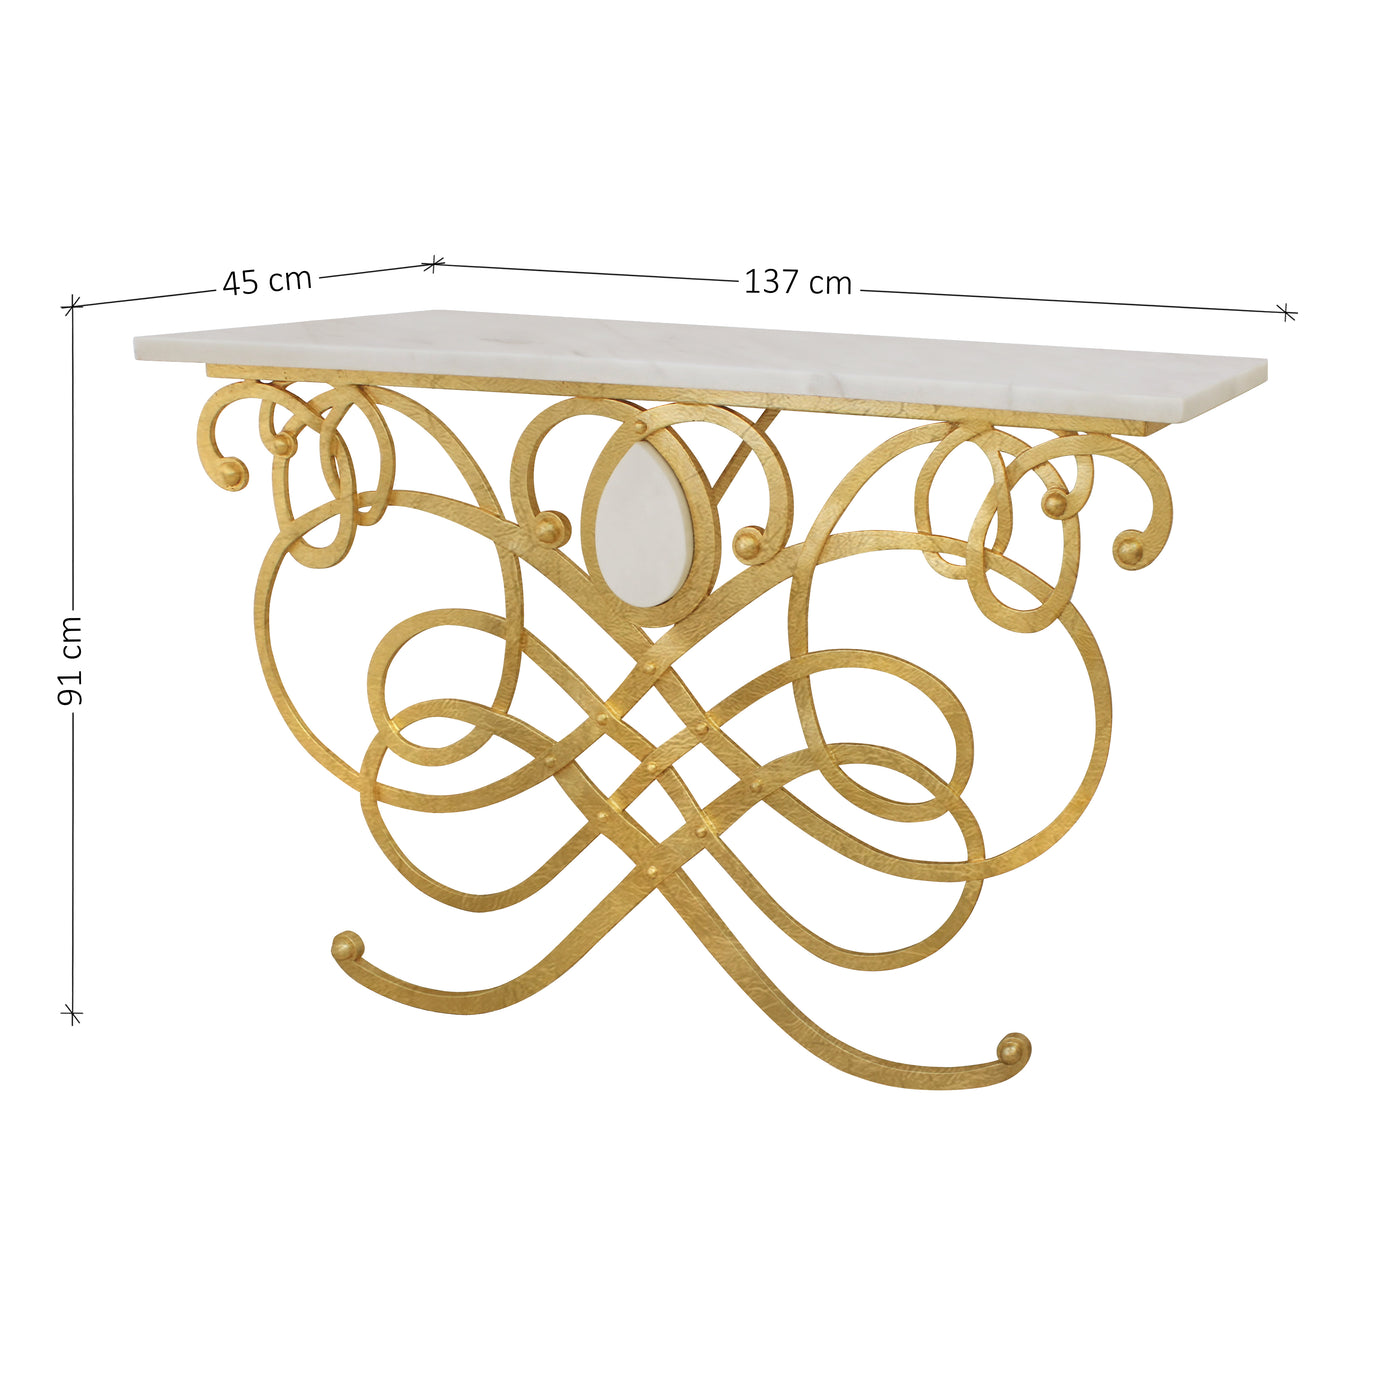 A luxurious entrance table with a gold leaf finish, topped with white marble; with annotated dimensions